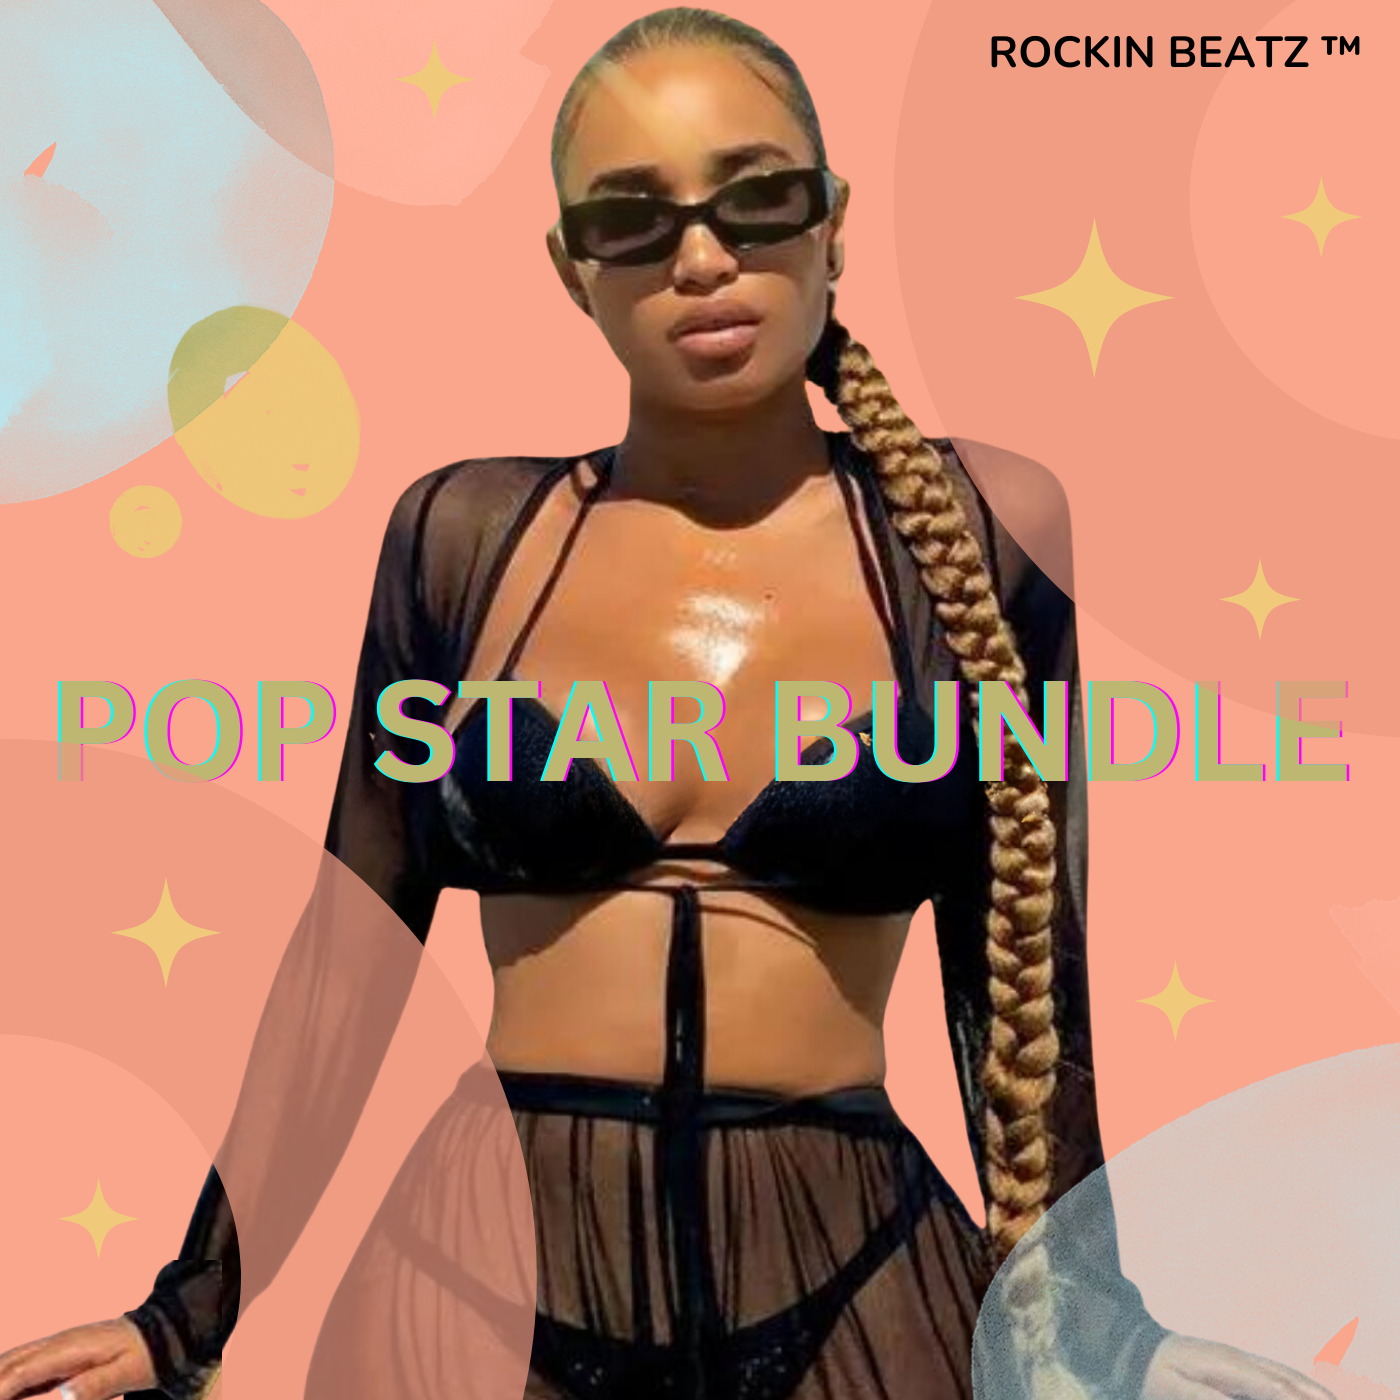 🏆 POP STAR BUNDLE 10 👉🏻 ONLY $799.99 🙀 GET YOUR ALBUM BUNDLE & VOCALS MIXED FOR FREE! 🚀 SAVE $100’s 🤑